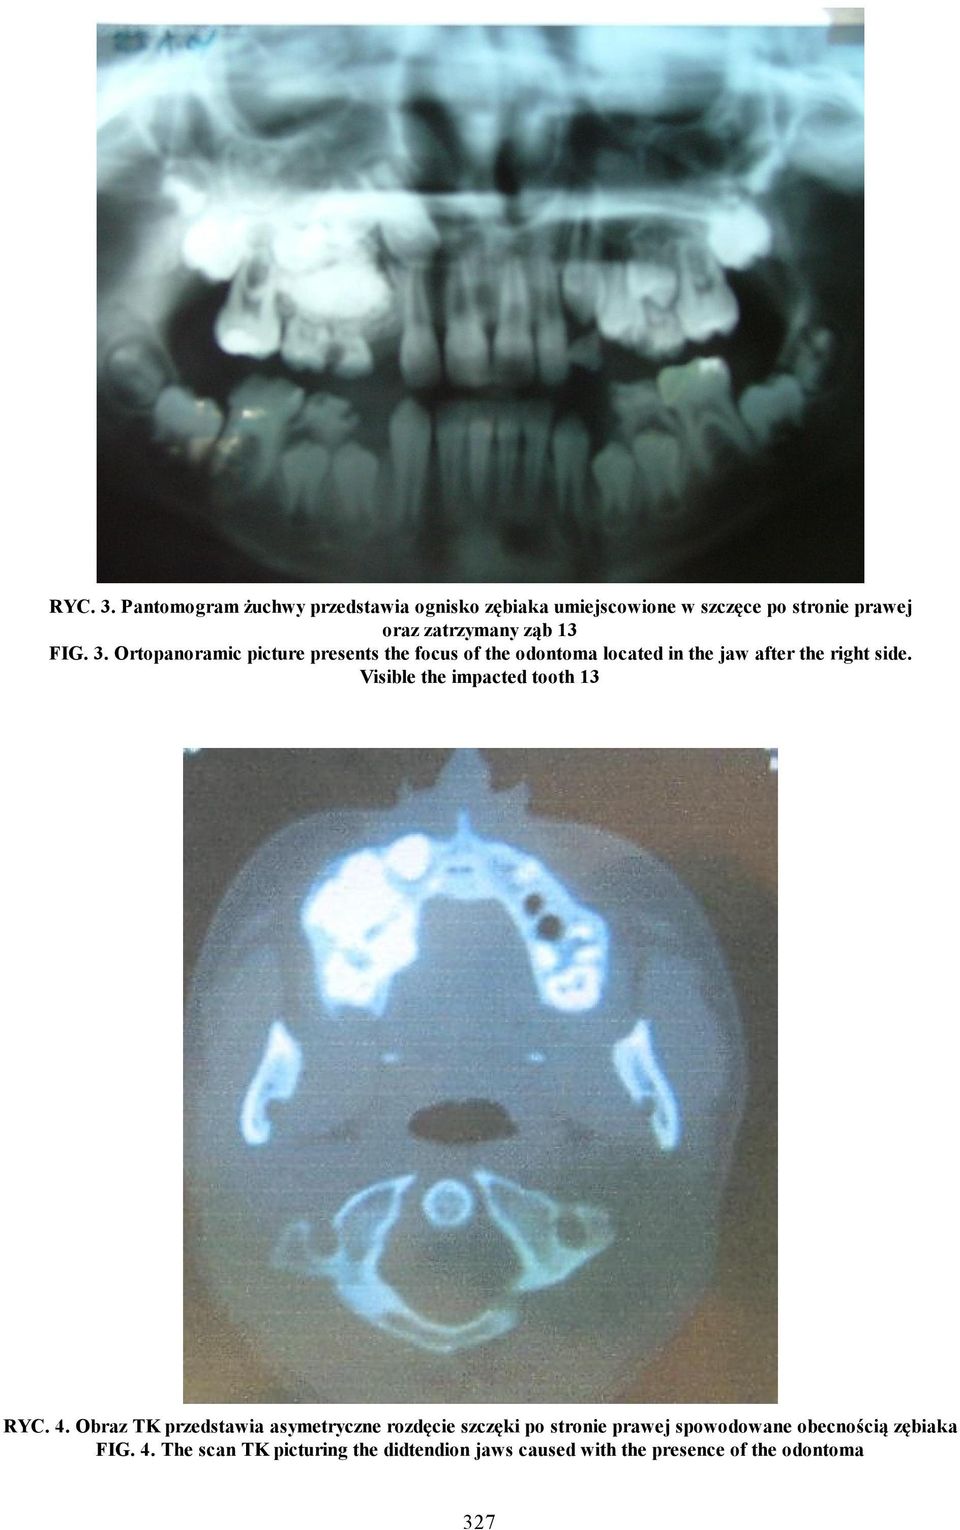 FIG. 3. Ortopanoramic picture presents the focus of the odontoma located in the jaw after the right side.